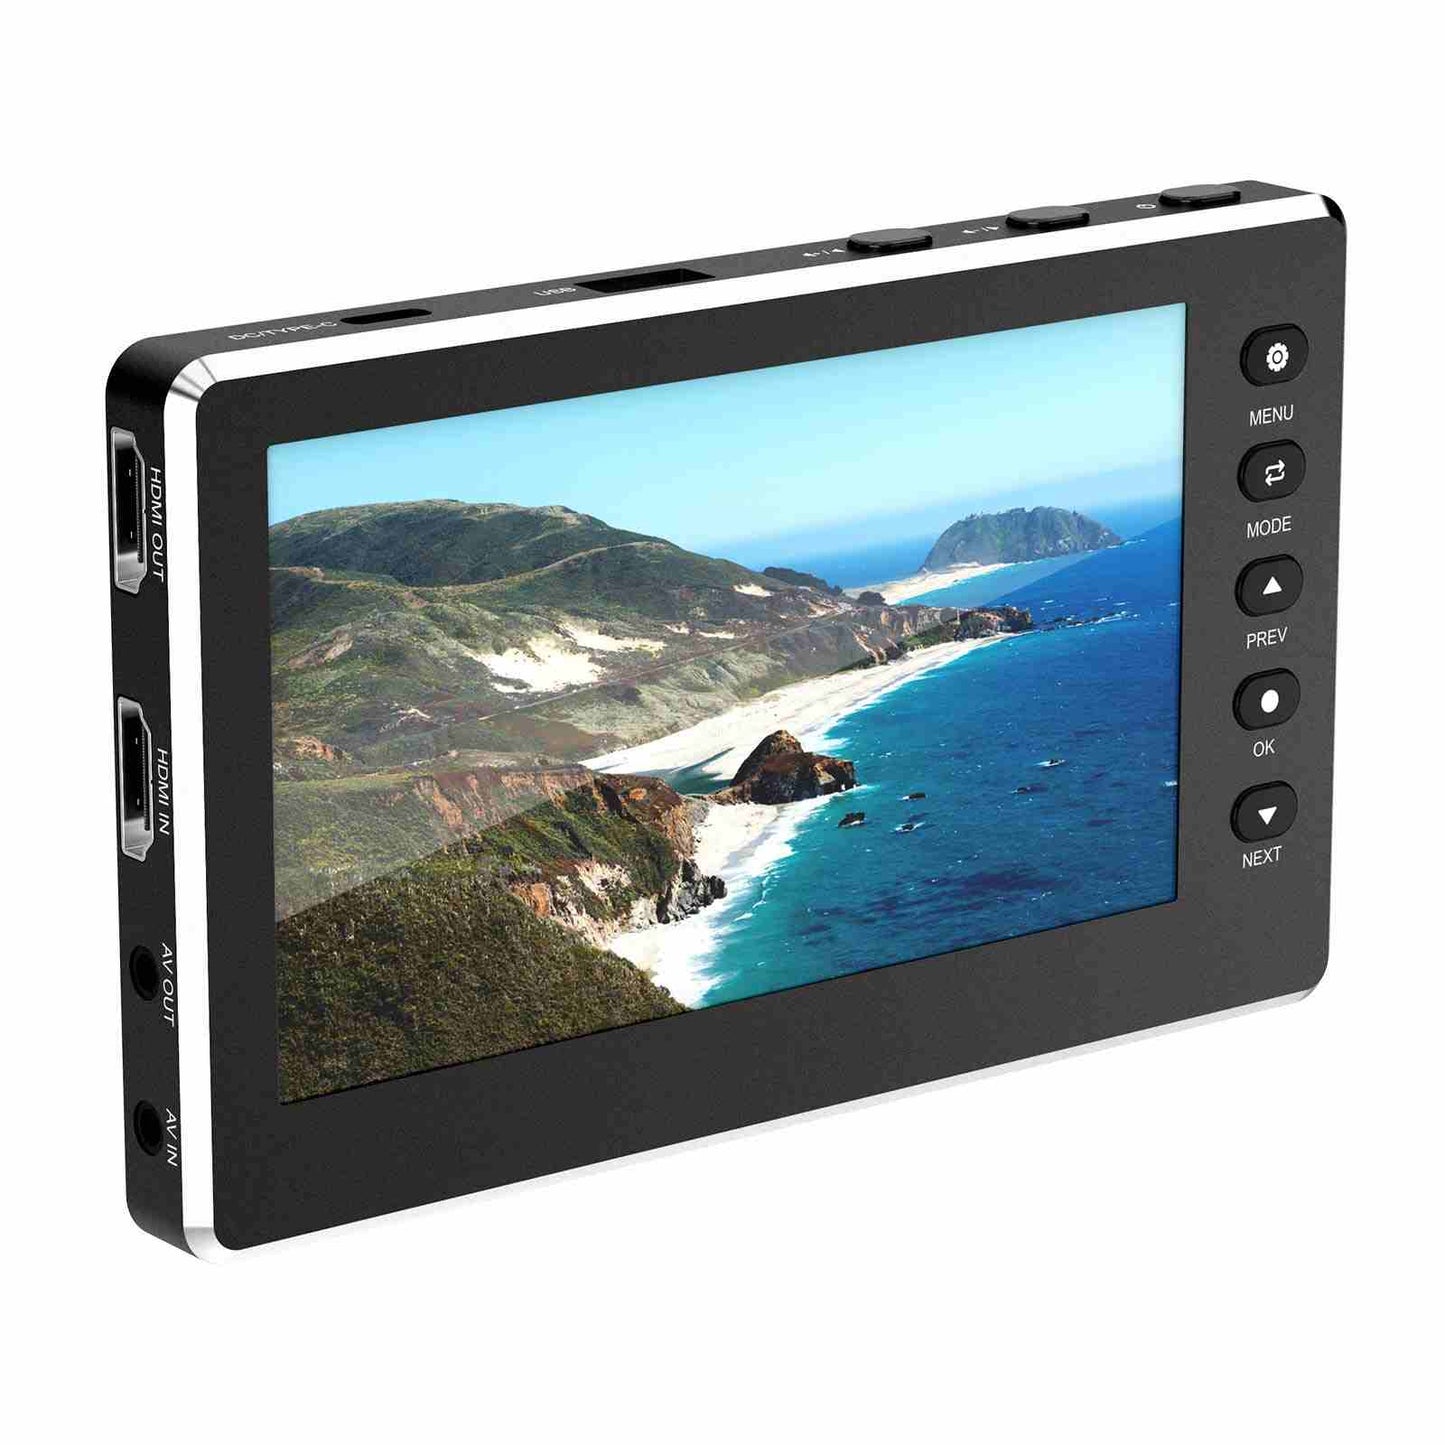 HD Video Capture Box 1080P 60FPS USB 2.0 with 5" OLED Screen